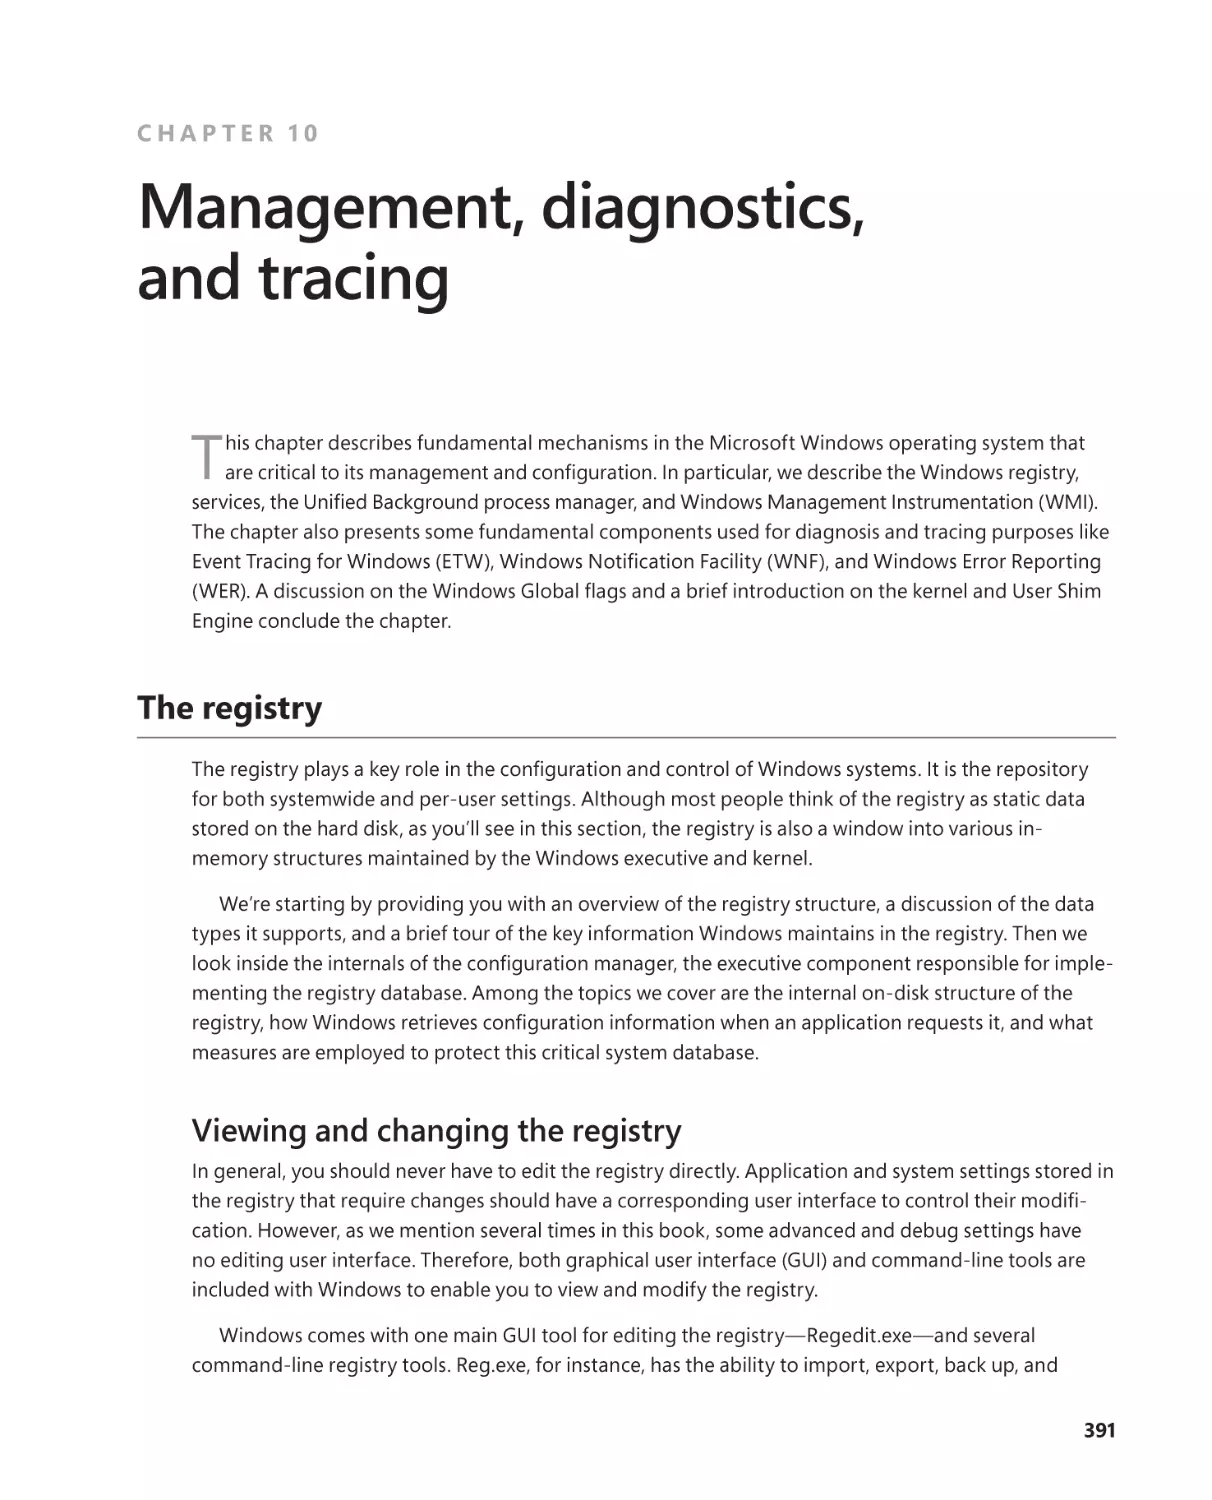 Chapter 10 Management, diagnostics, and tracing
The registry
Viewing and changing the registry